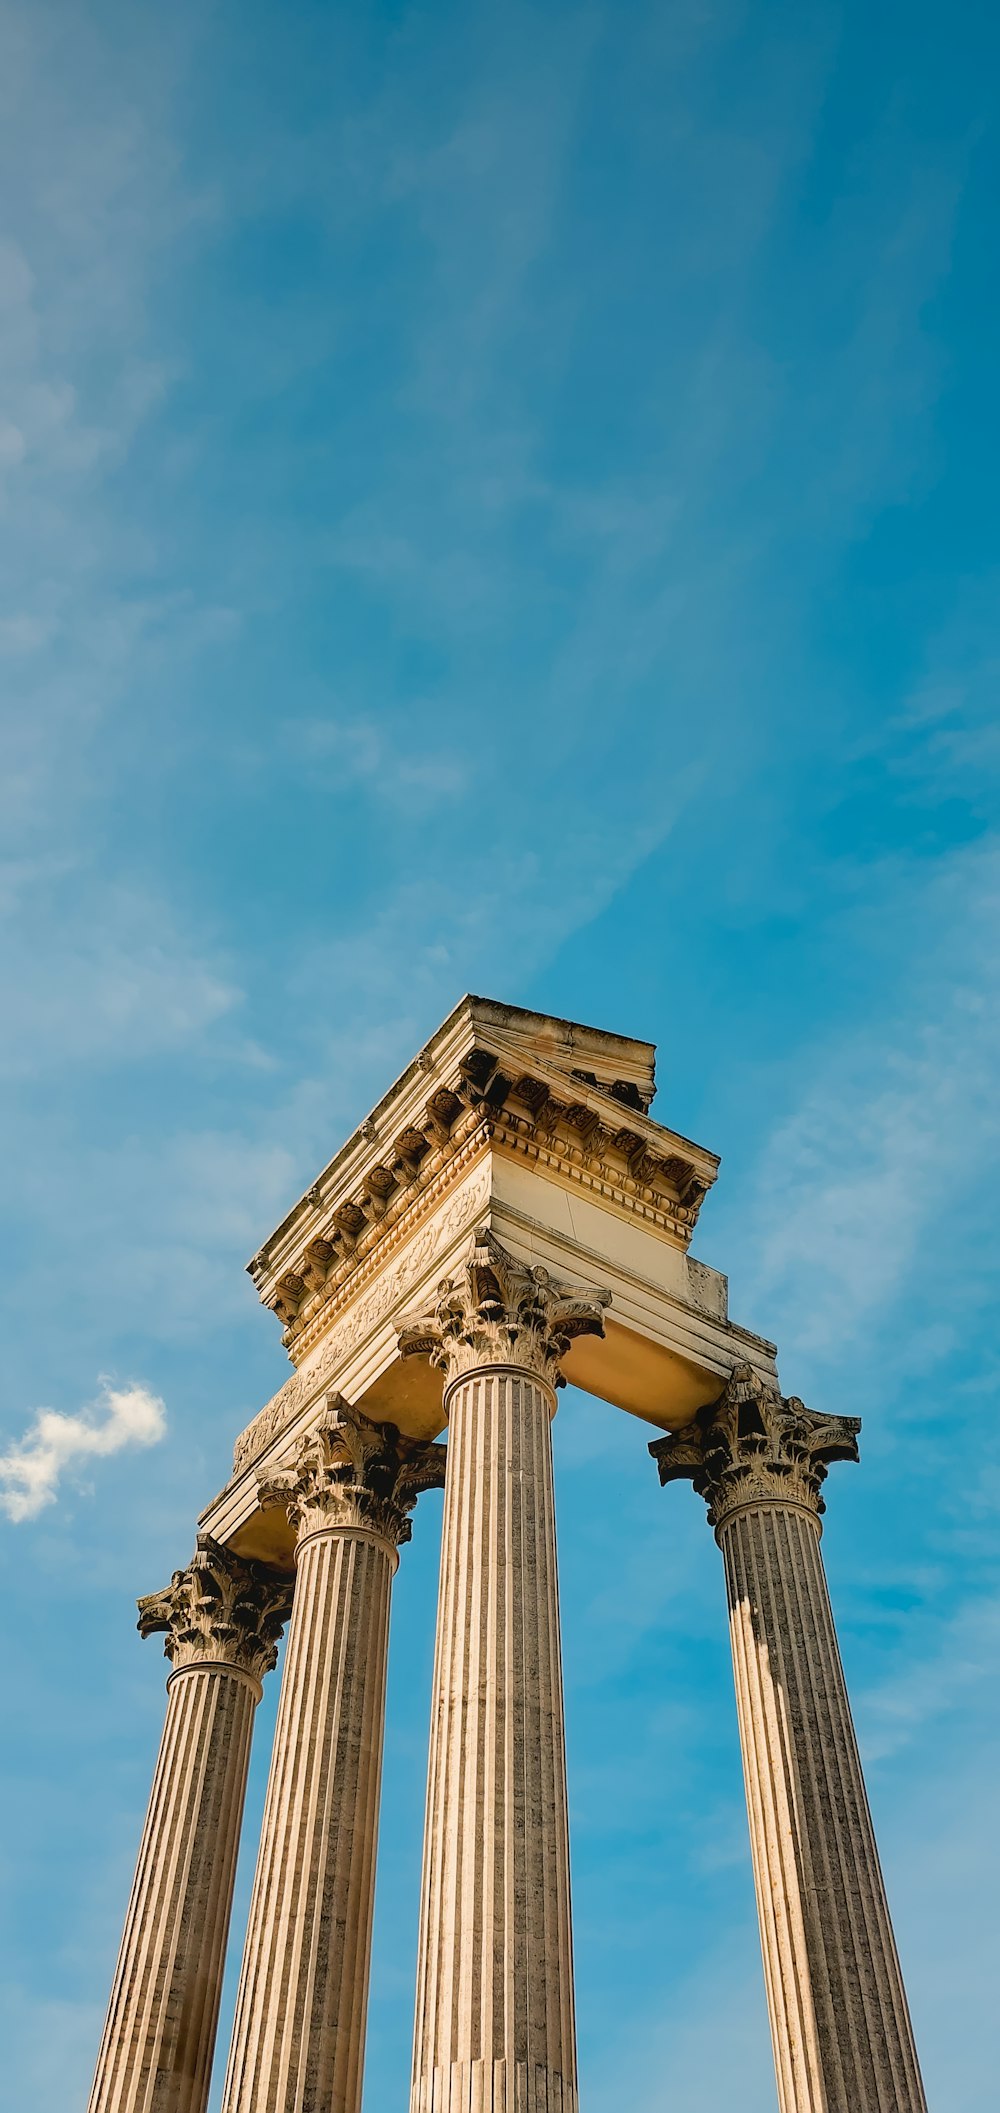 a tall pillar with two columns on top of it